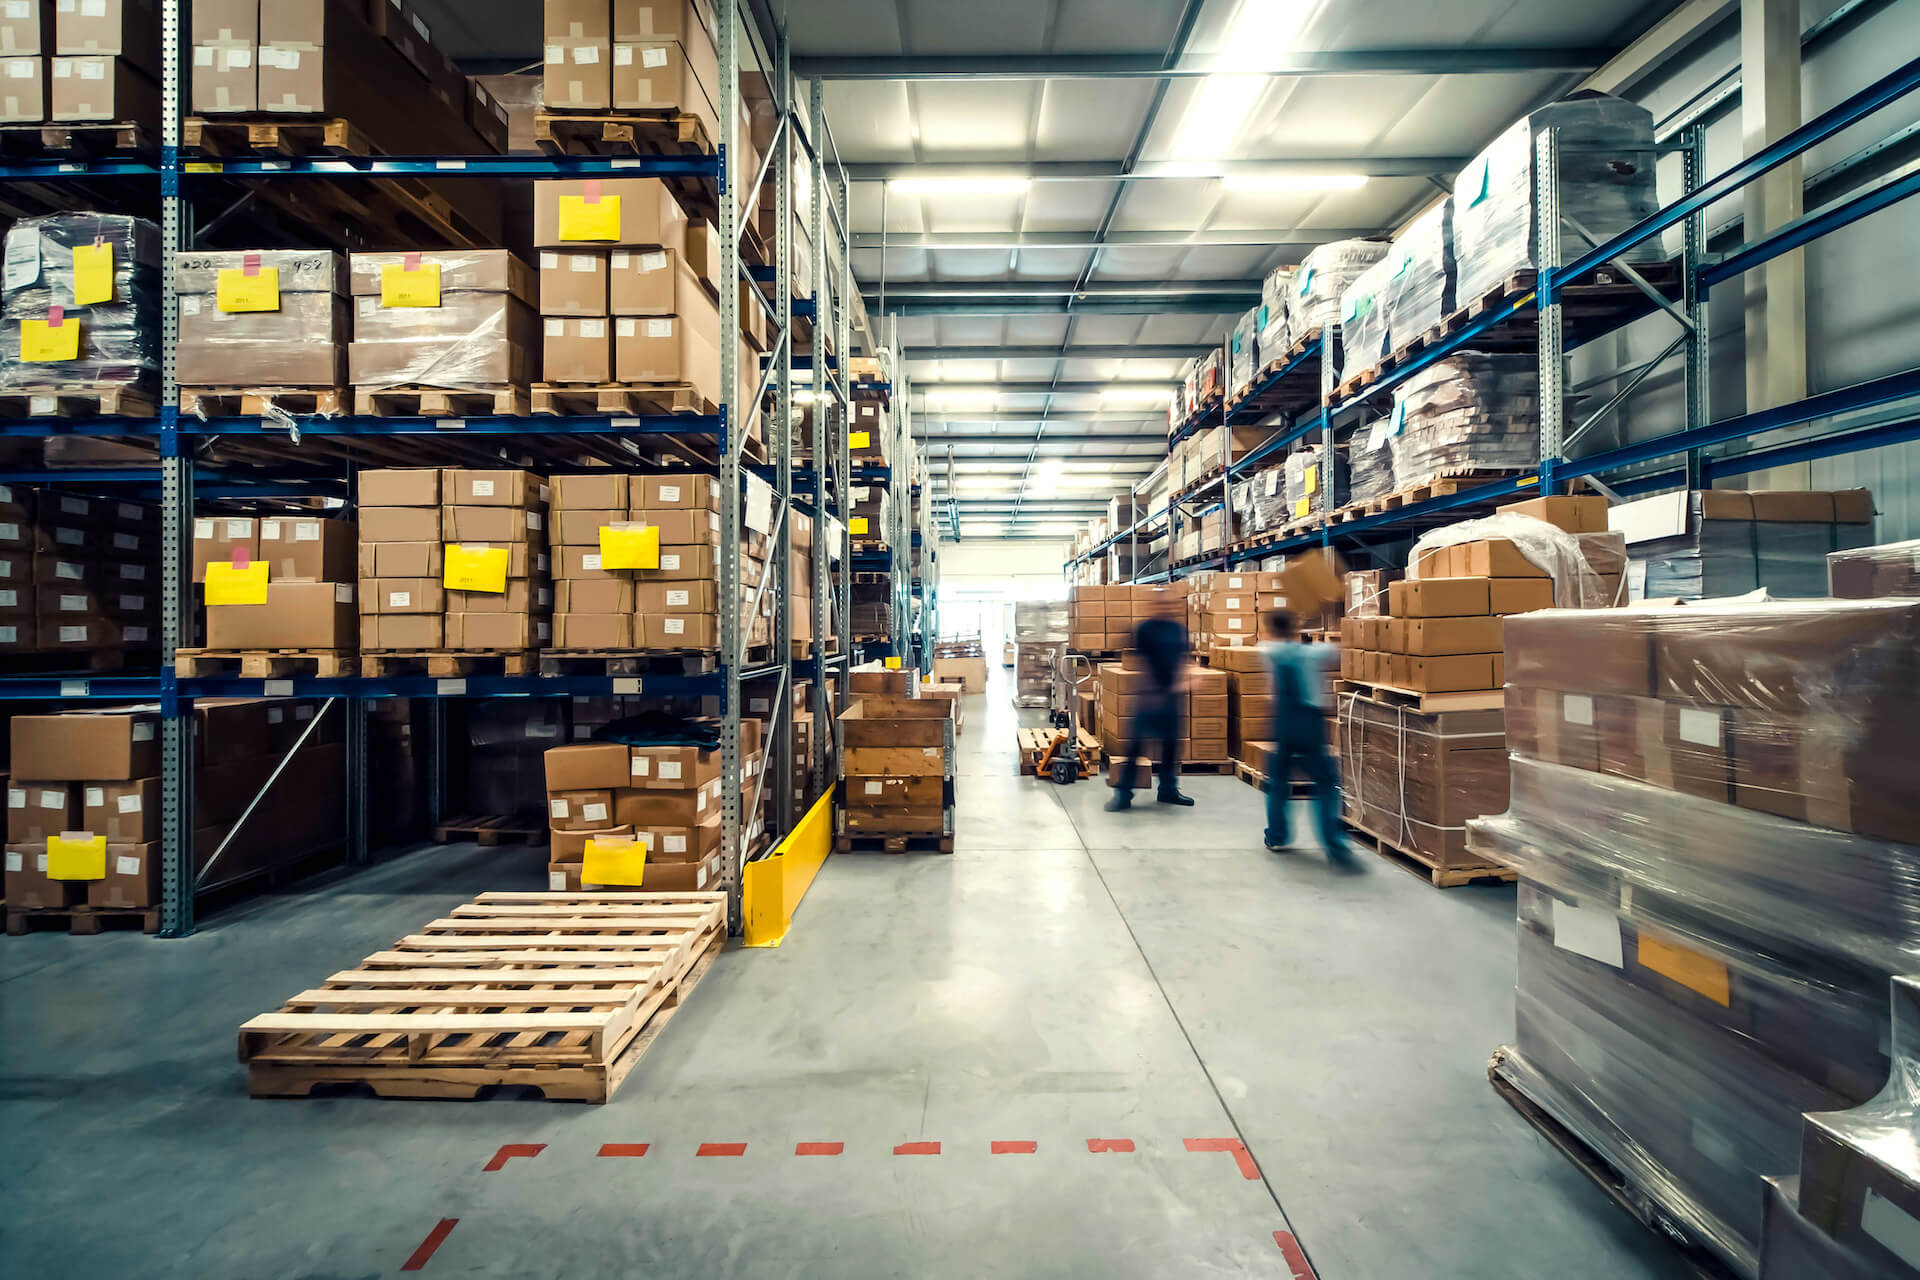 Busy Warehouse Storing Ecommerce Shipments